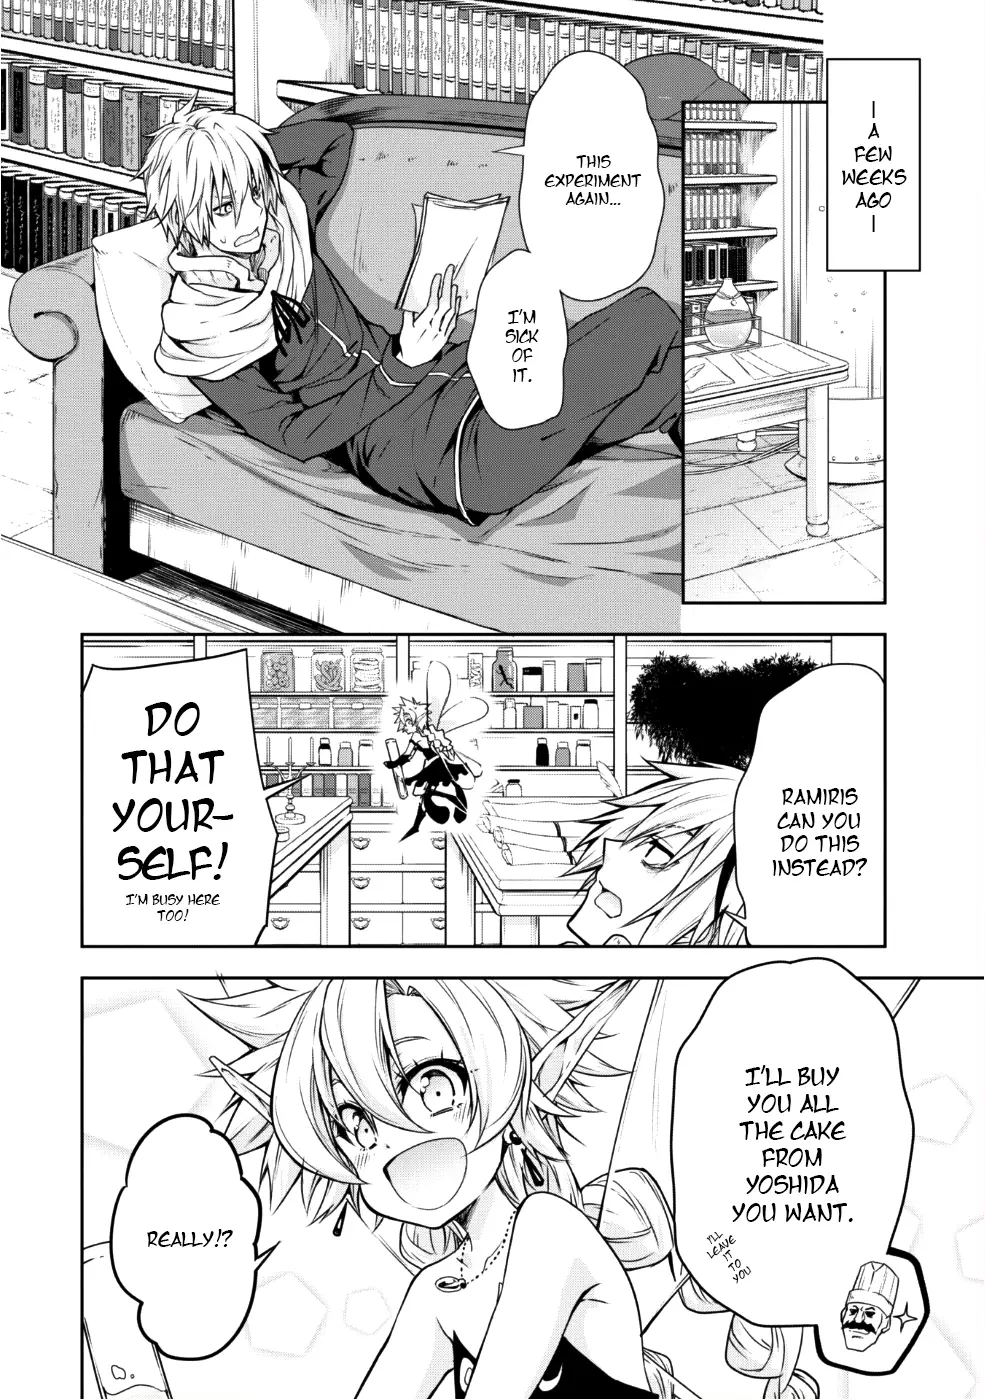 Tensei Shitara Slime Datta Ken: The Ways of Strolling in the Demon Country - 30 page 6